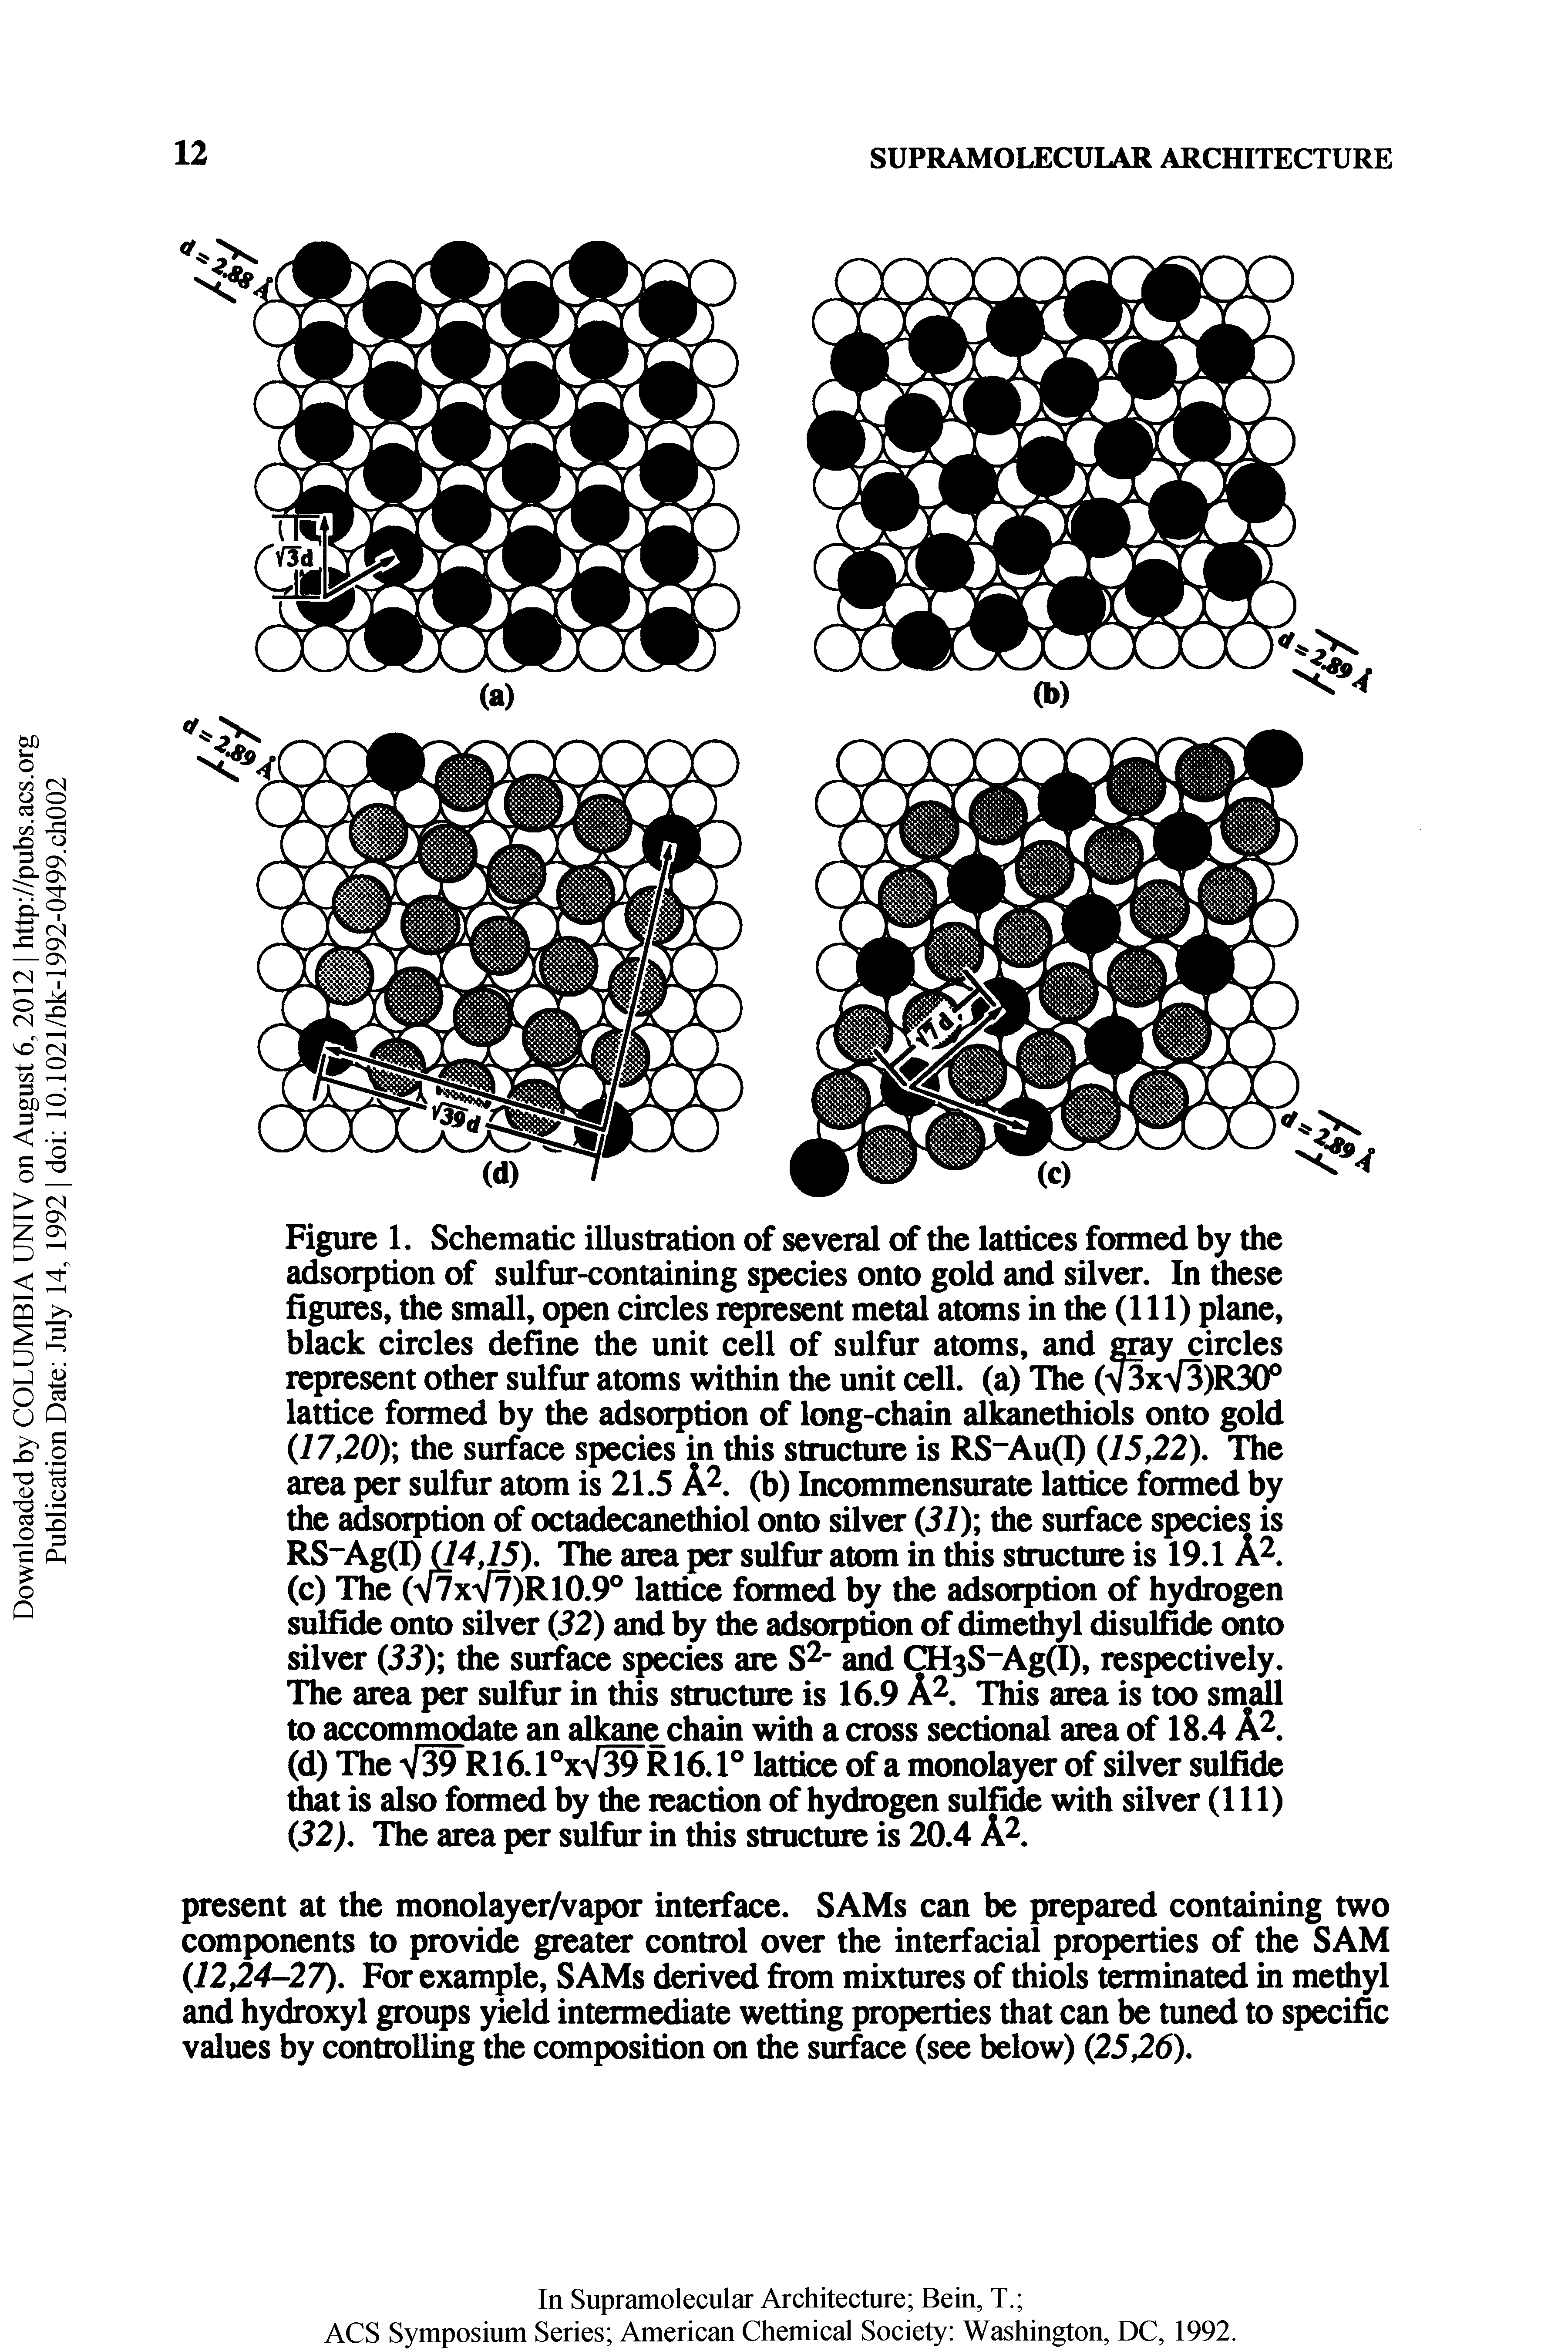 Figure 1. Schematic illustration of several of the lattices formed by the adsorption of sulfur-containing species onto gold and silver. In diese figures, the small, open circles represent metal atoms in the (111) plane, black circles define the unit cell of sulfur atoms, and my circles represent other sulfur atoms within die unit cell, (a) The ( f3xV3)R30° lattice formed by the adsorption of long-chain alk ethiols onto gold (17,20) the surface species in this structure is RS"Au(I) (15,22). The area per sulfur atom is 21.5 A. (b) Incommensurate lattice formed by the adsorption of octadecanethiol onto silver (31) the surface species is...